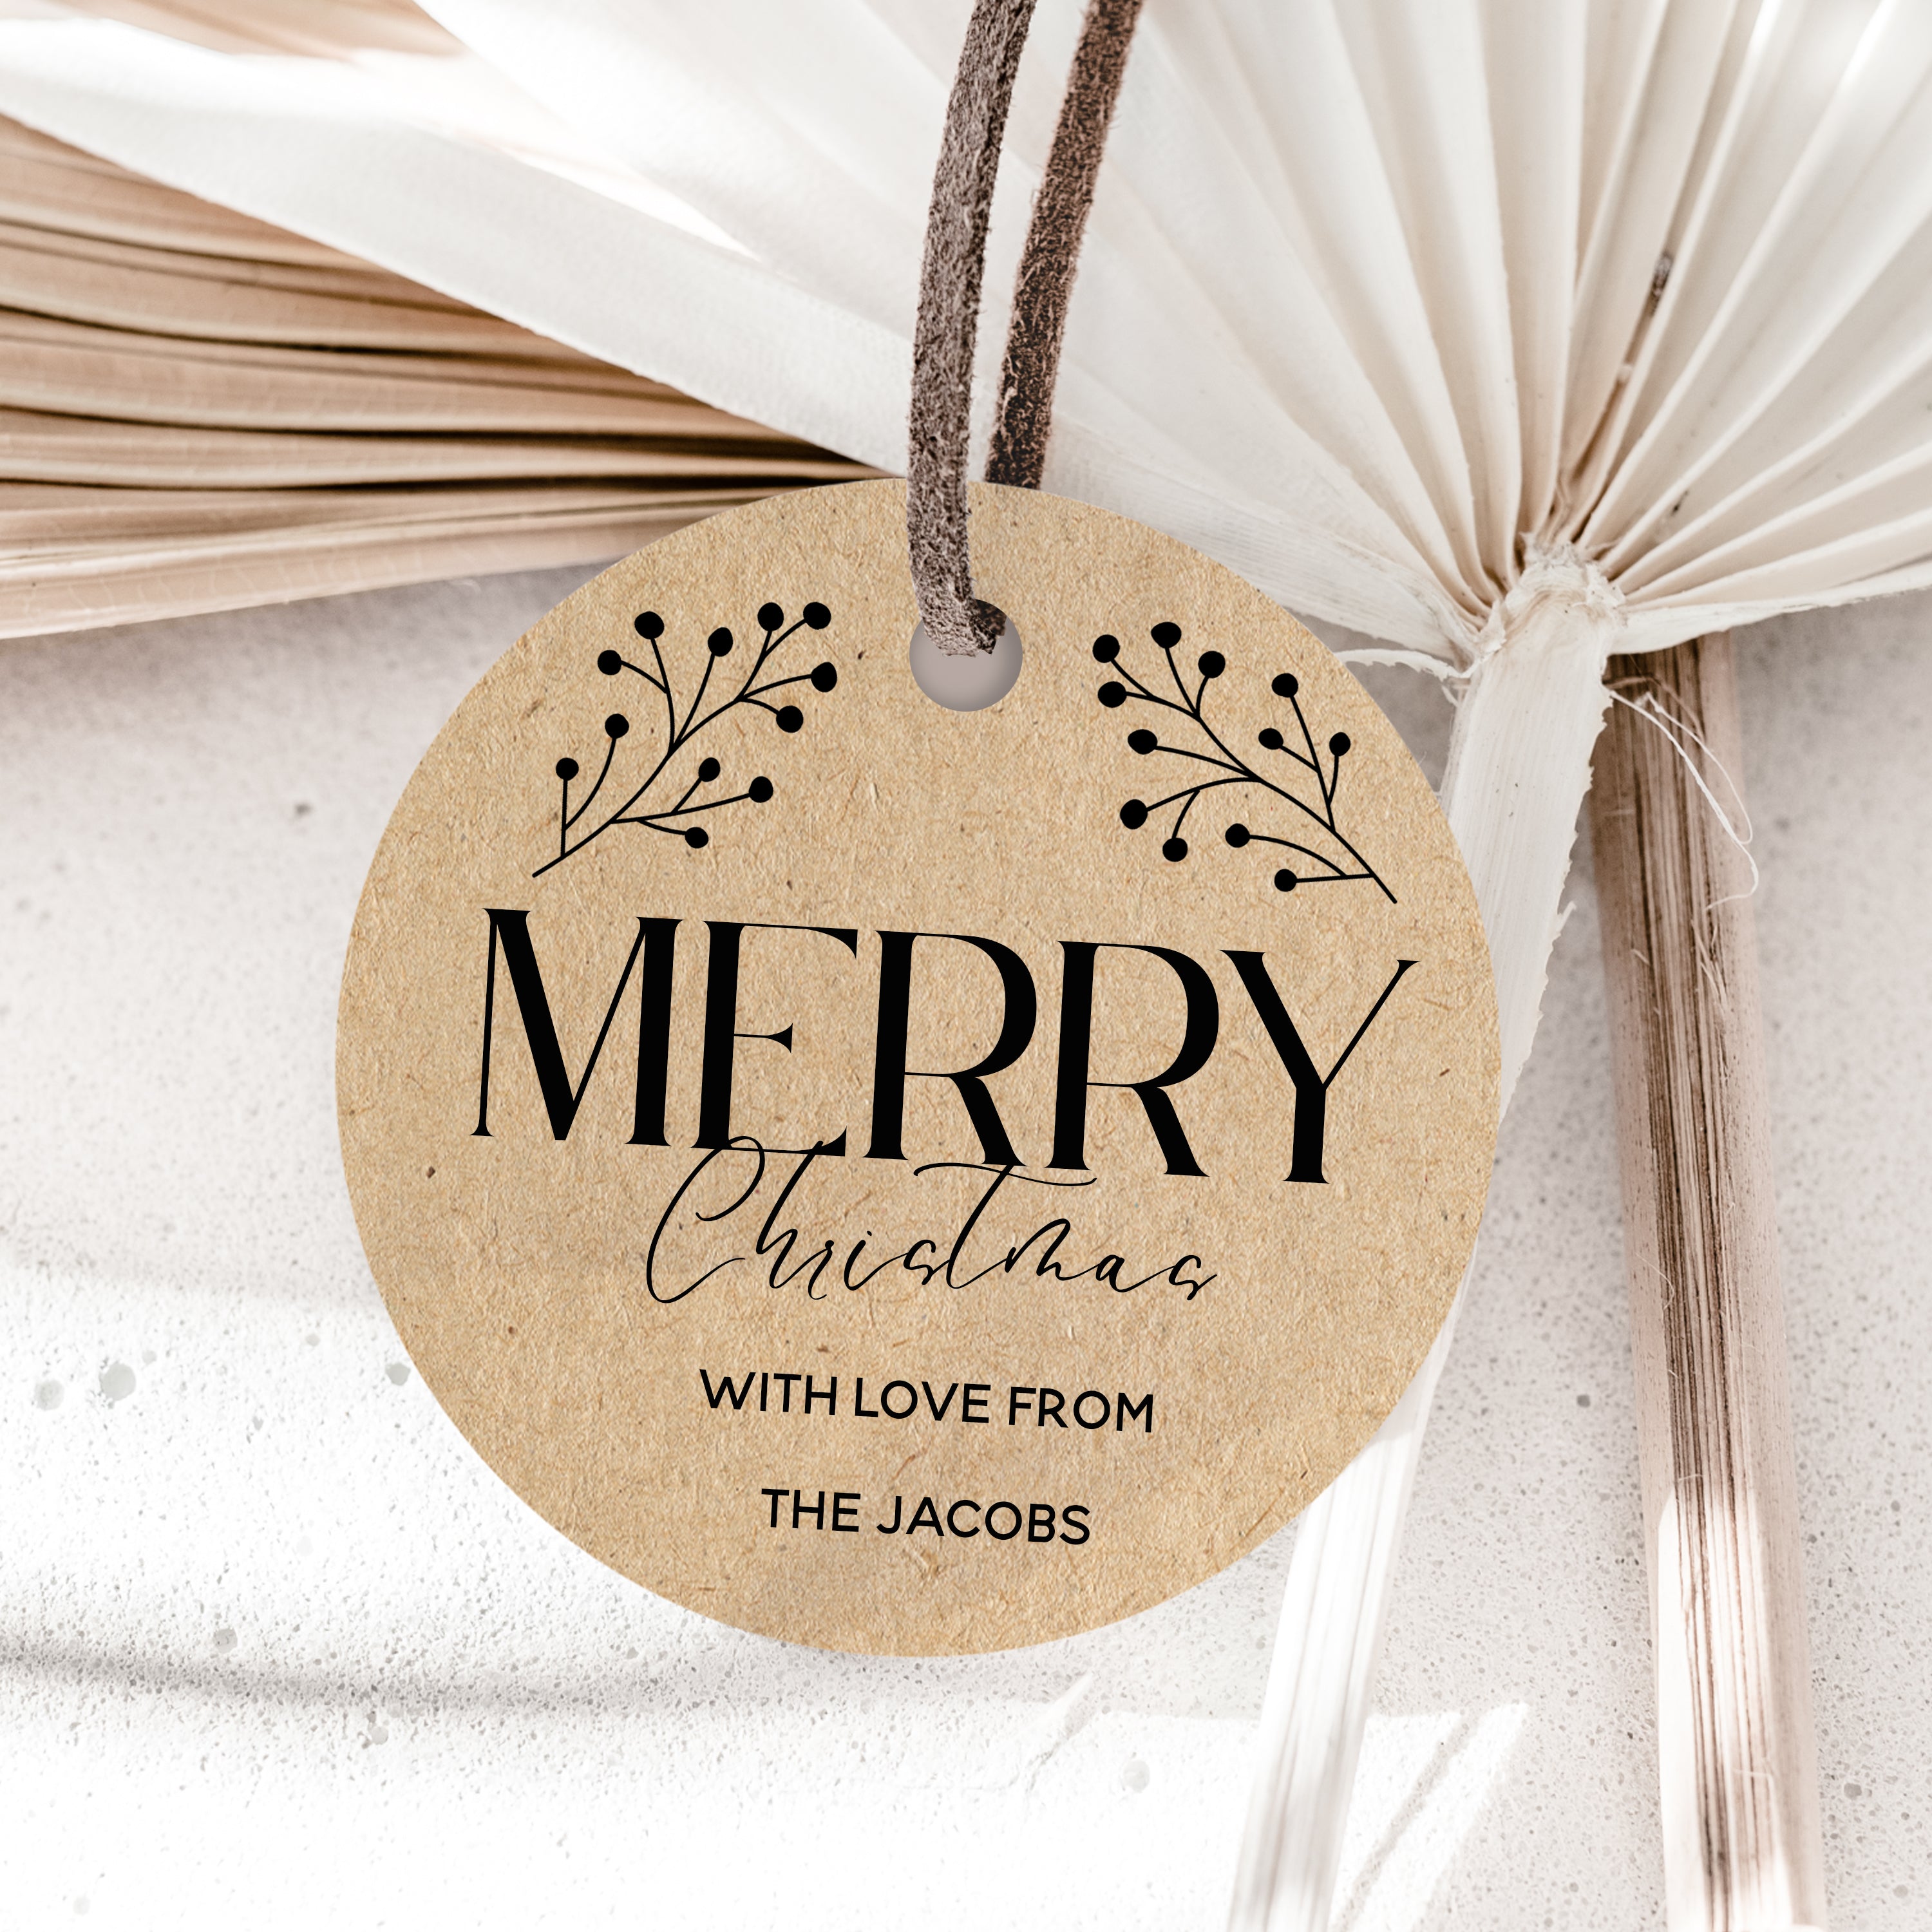 Personalised Berry Christmas gift tags